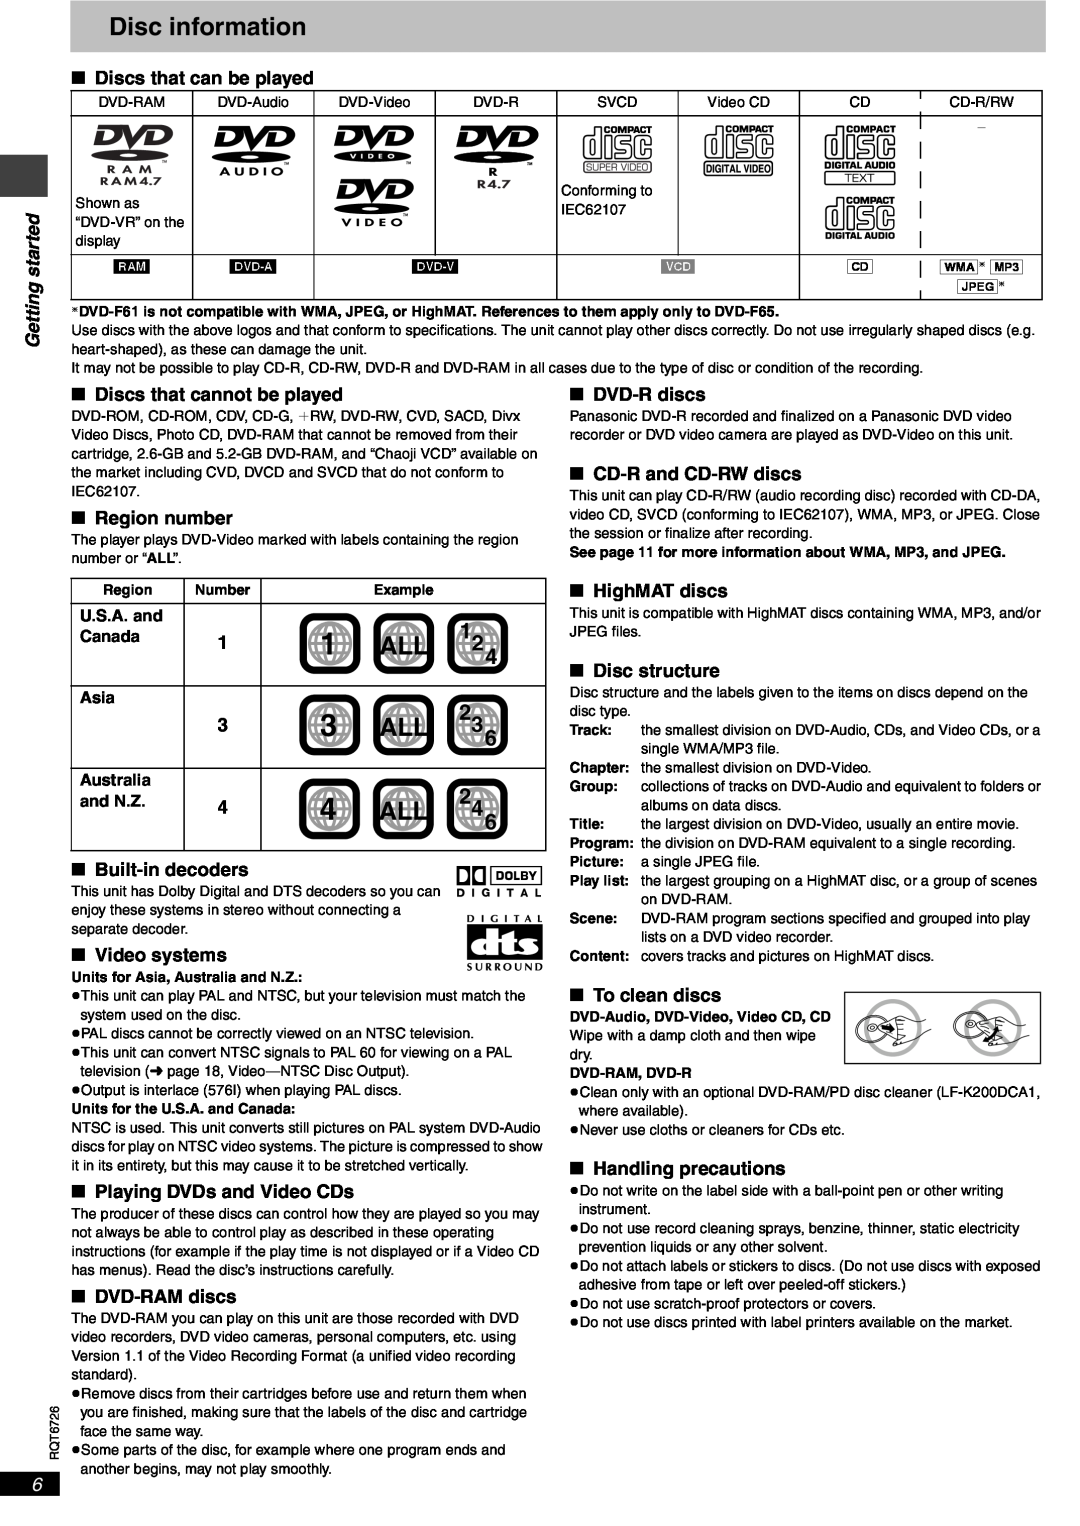 Panasonic DVD-F61 important safety instructions Disc information, Getting started, ∫ Discs that can be played 